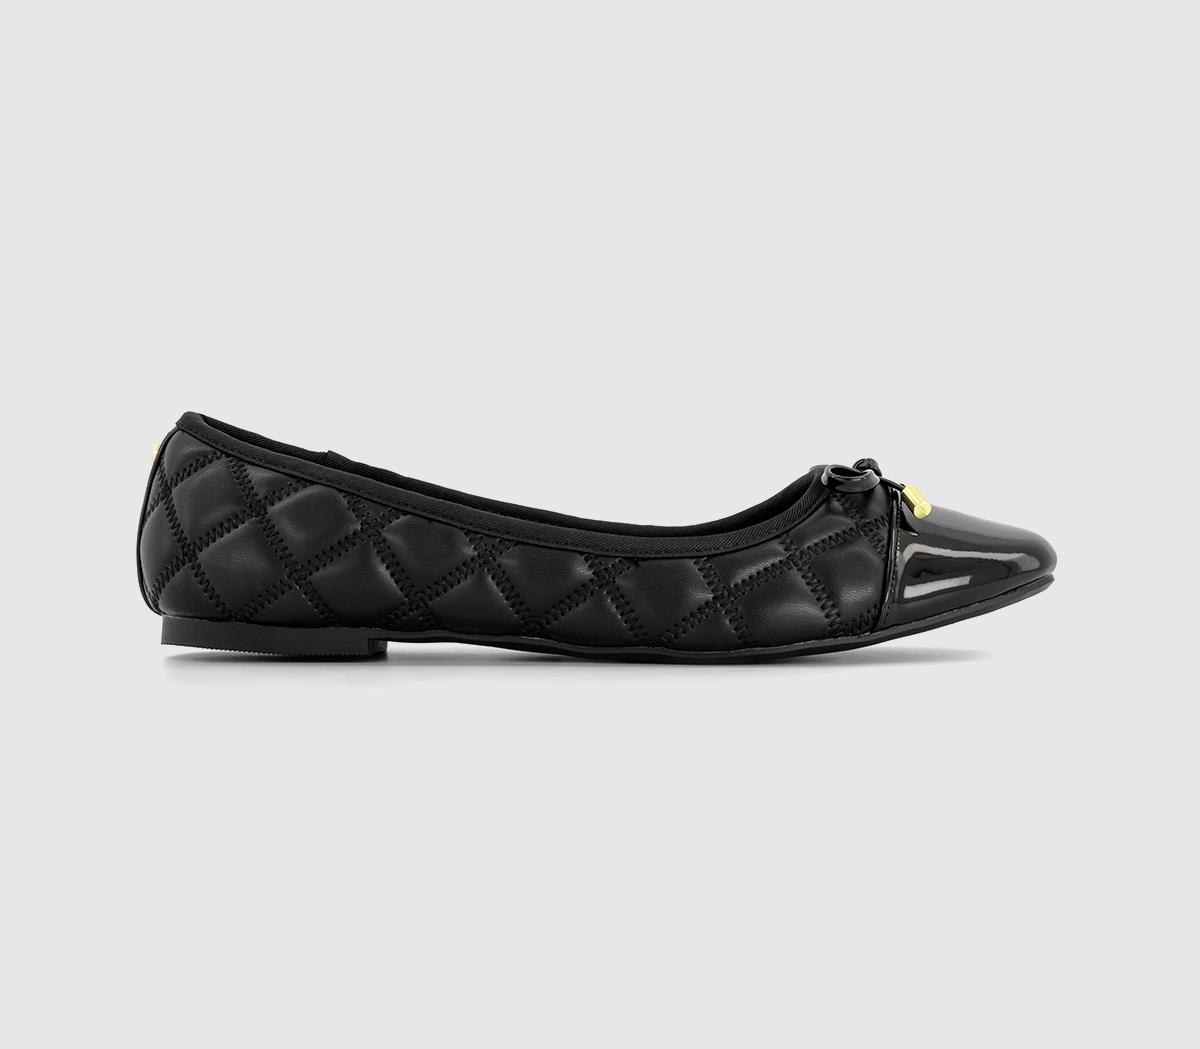 Foreveryoung Quilted Toe Cap Bow Ballerina Shoes Black